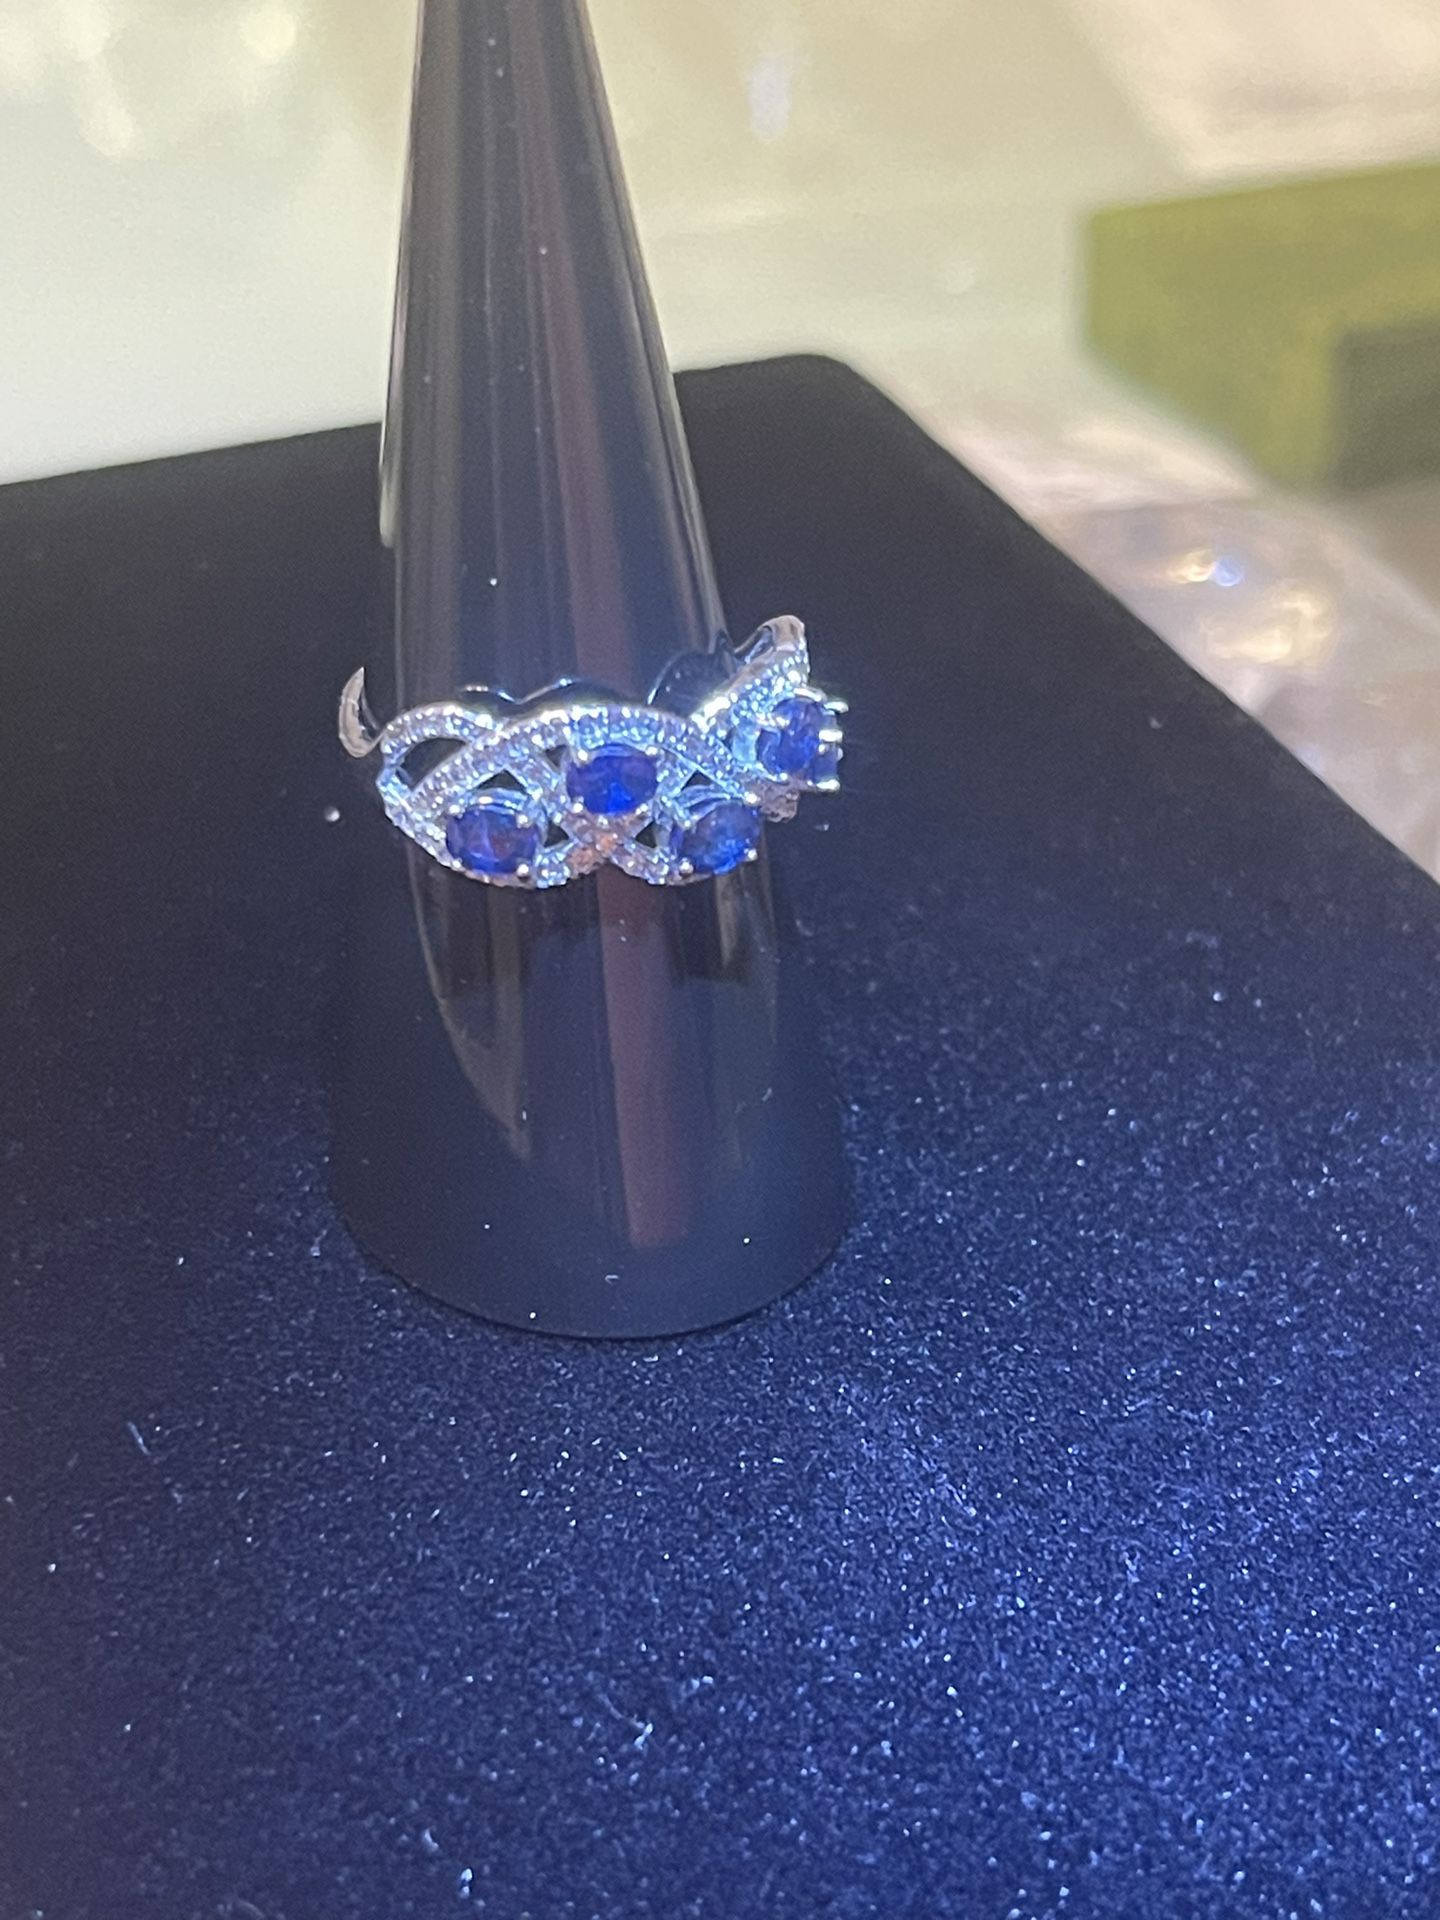 Breathtaking Sapphire Ring With Cubic Zirconia. S925 Silver. Adjustable.